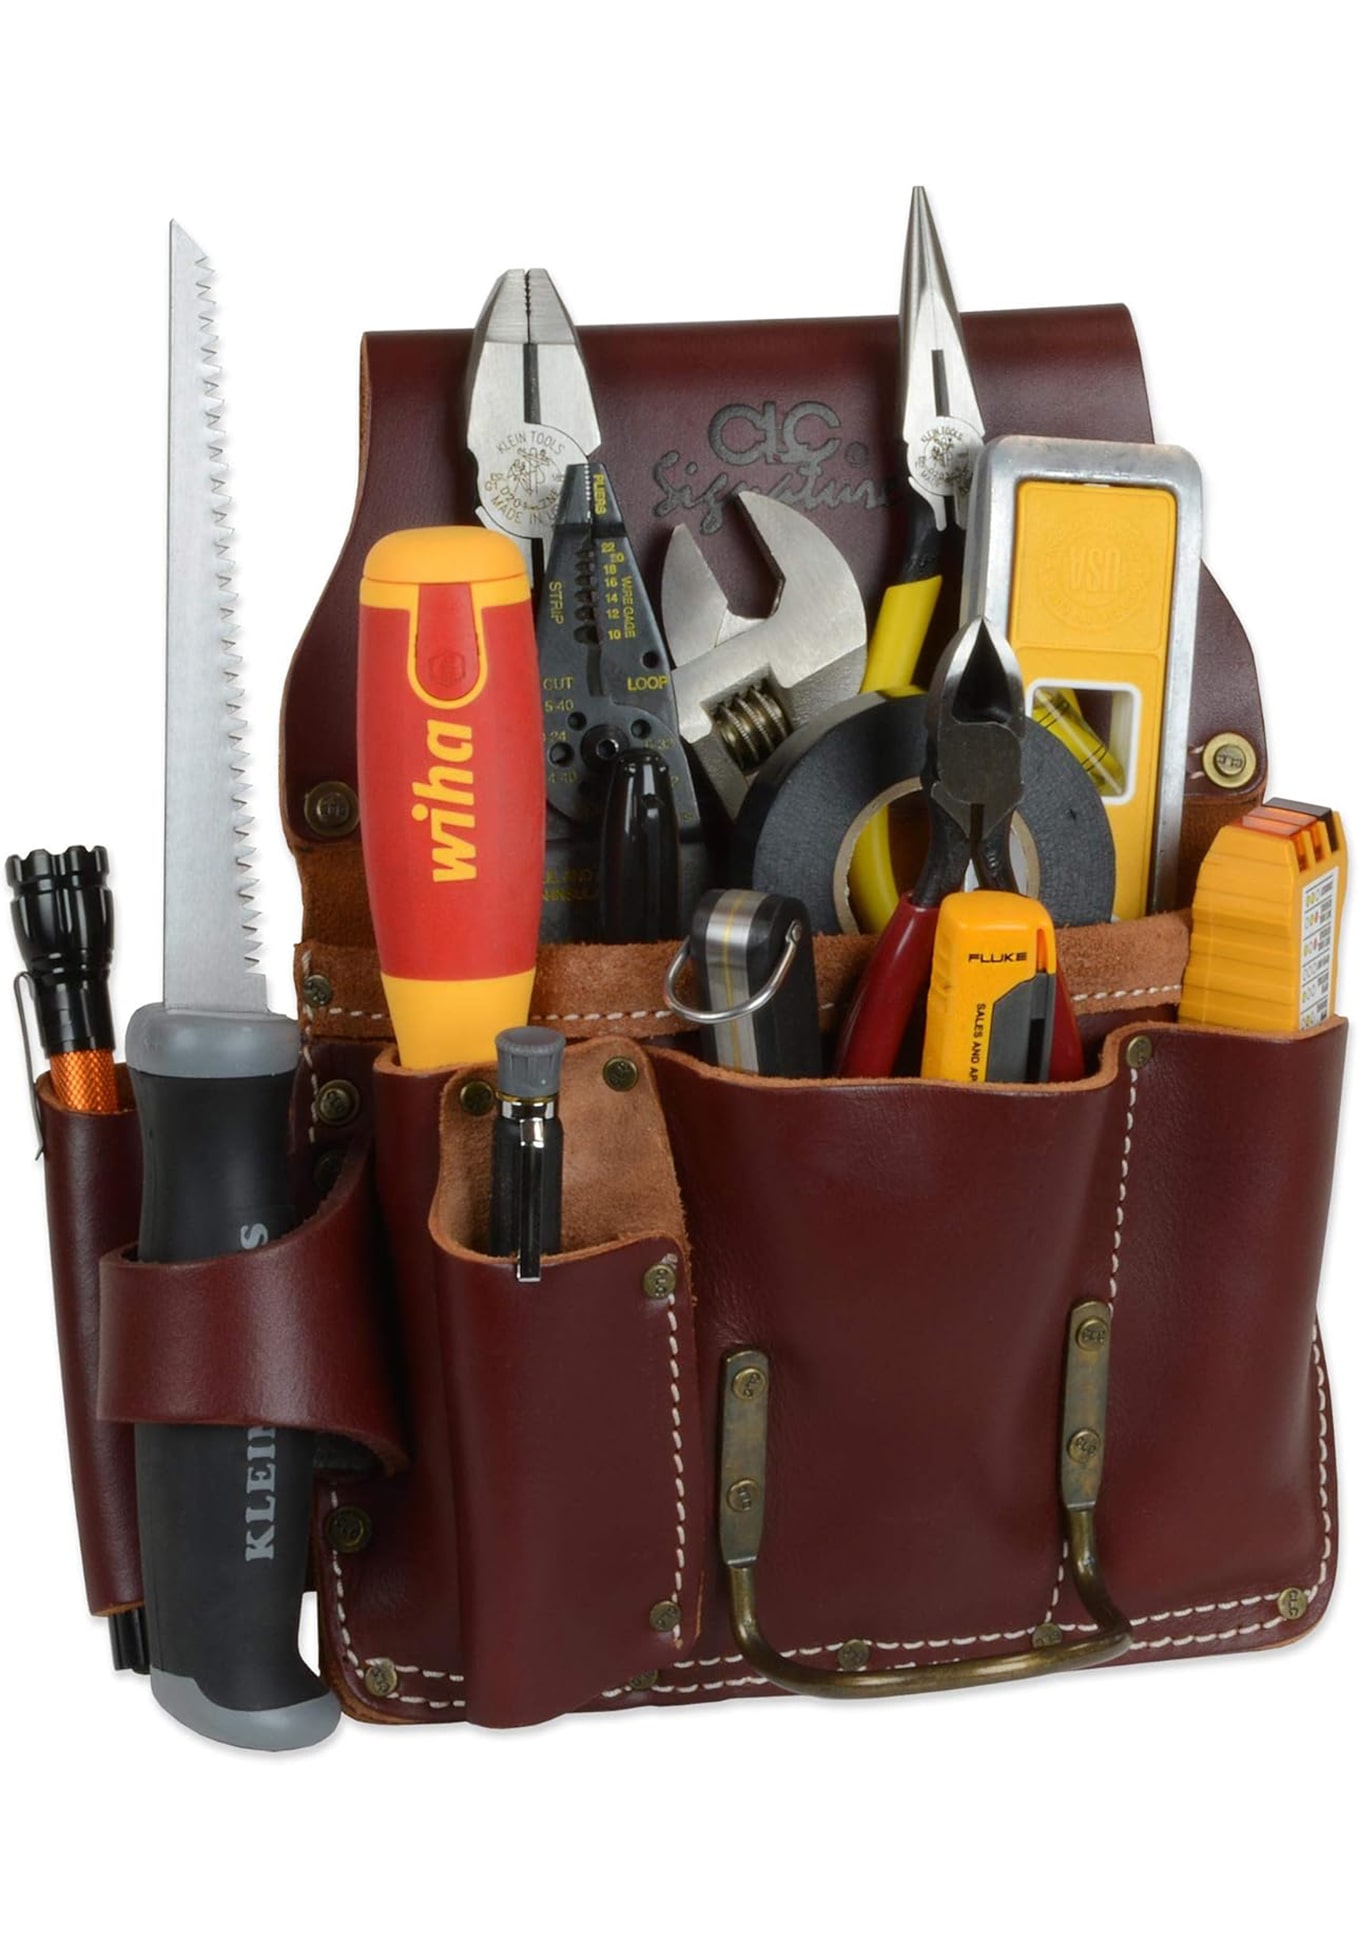 handy-and-general-tools/